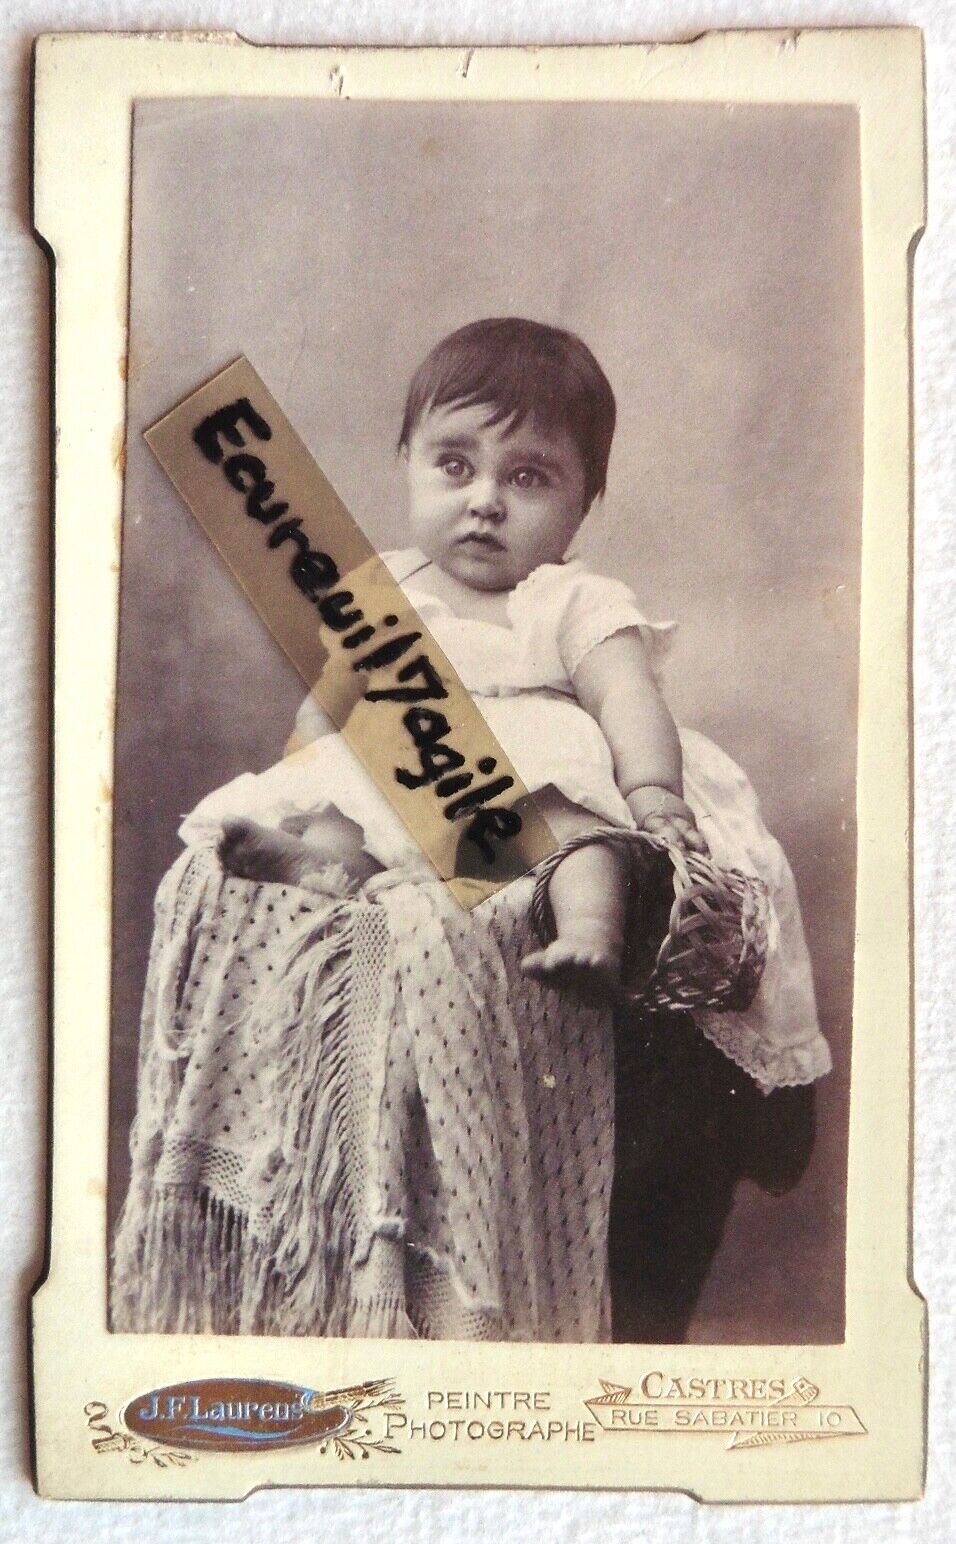 CDV LAURENS to CASTRES baby child named son of Louise JAMES H95